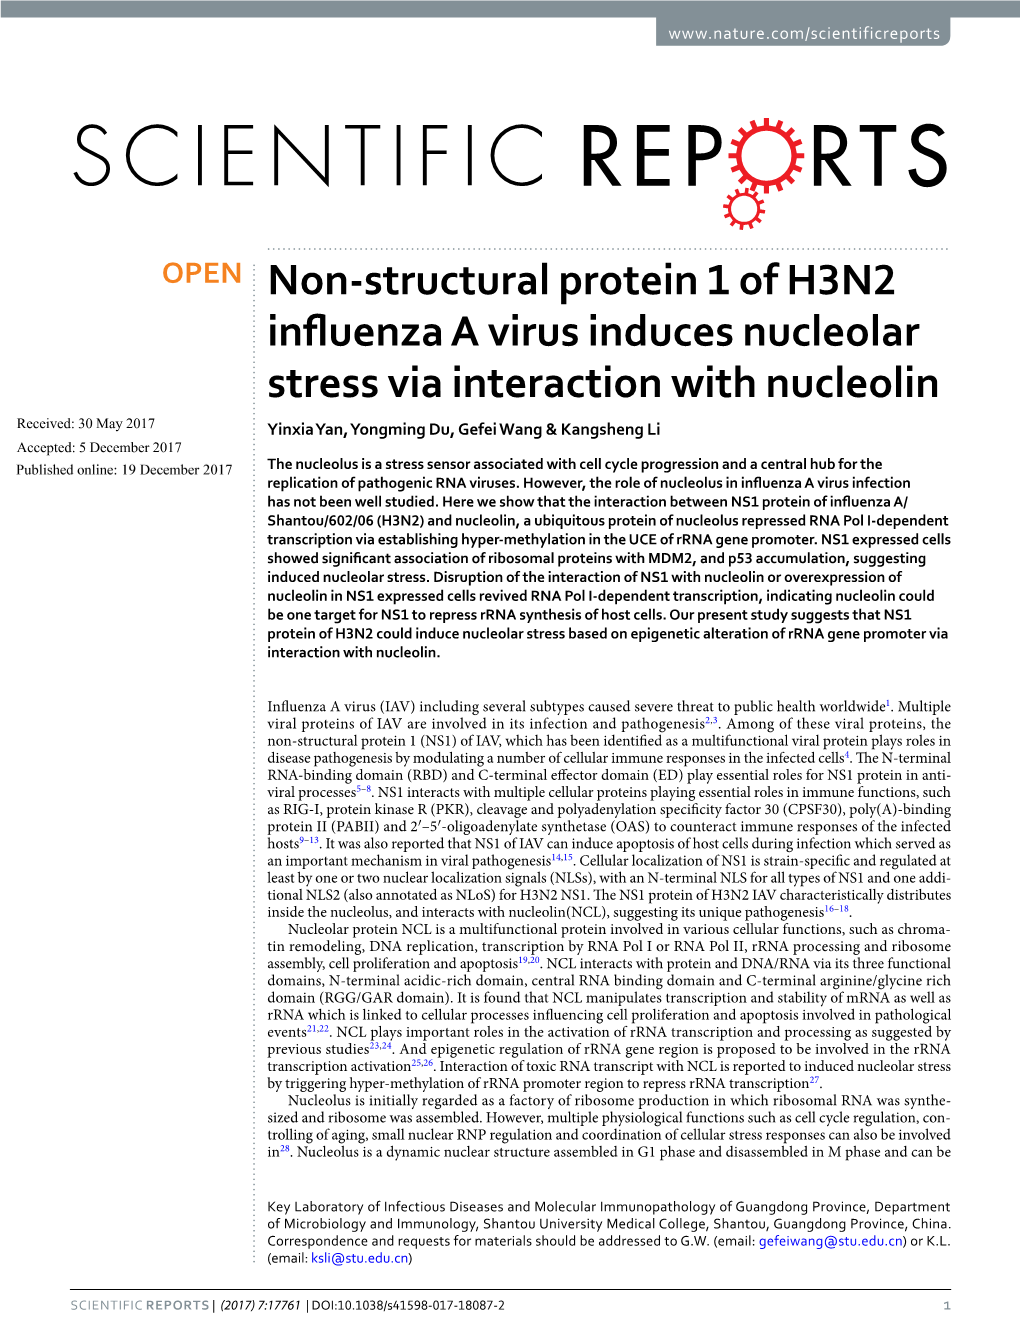 Non-Structural Protein 1 of H3N2 Influenza a Virus Induces Nucleolar